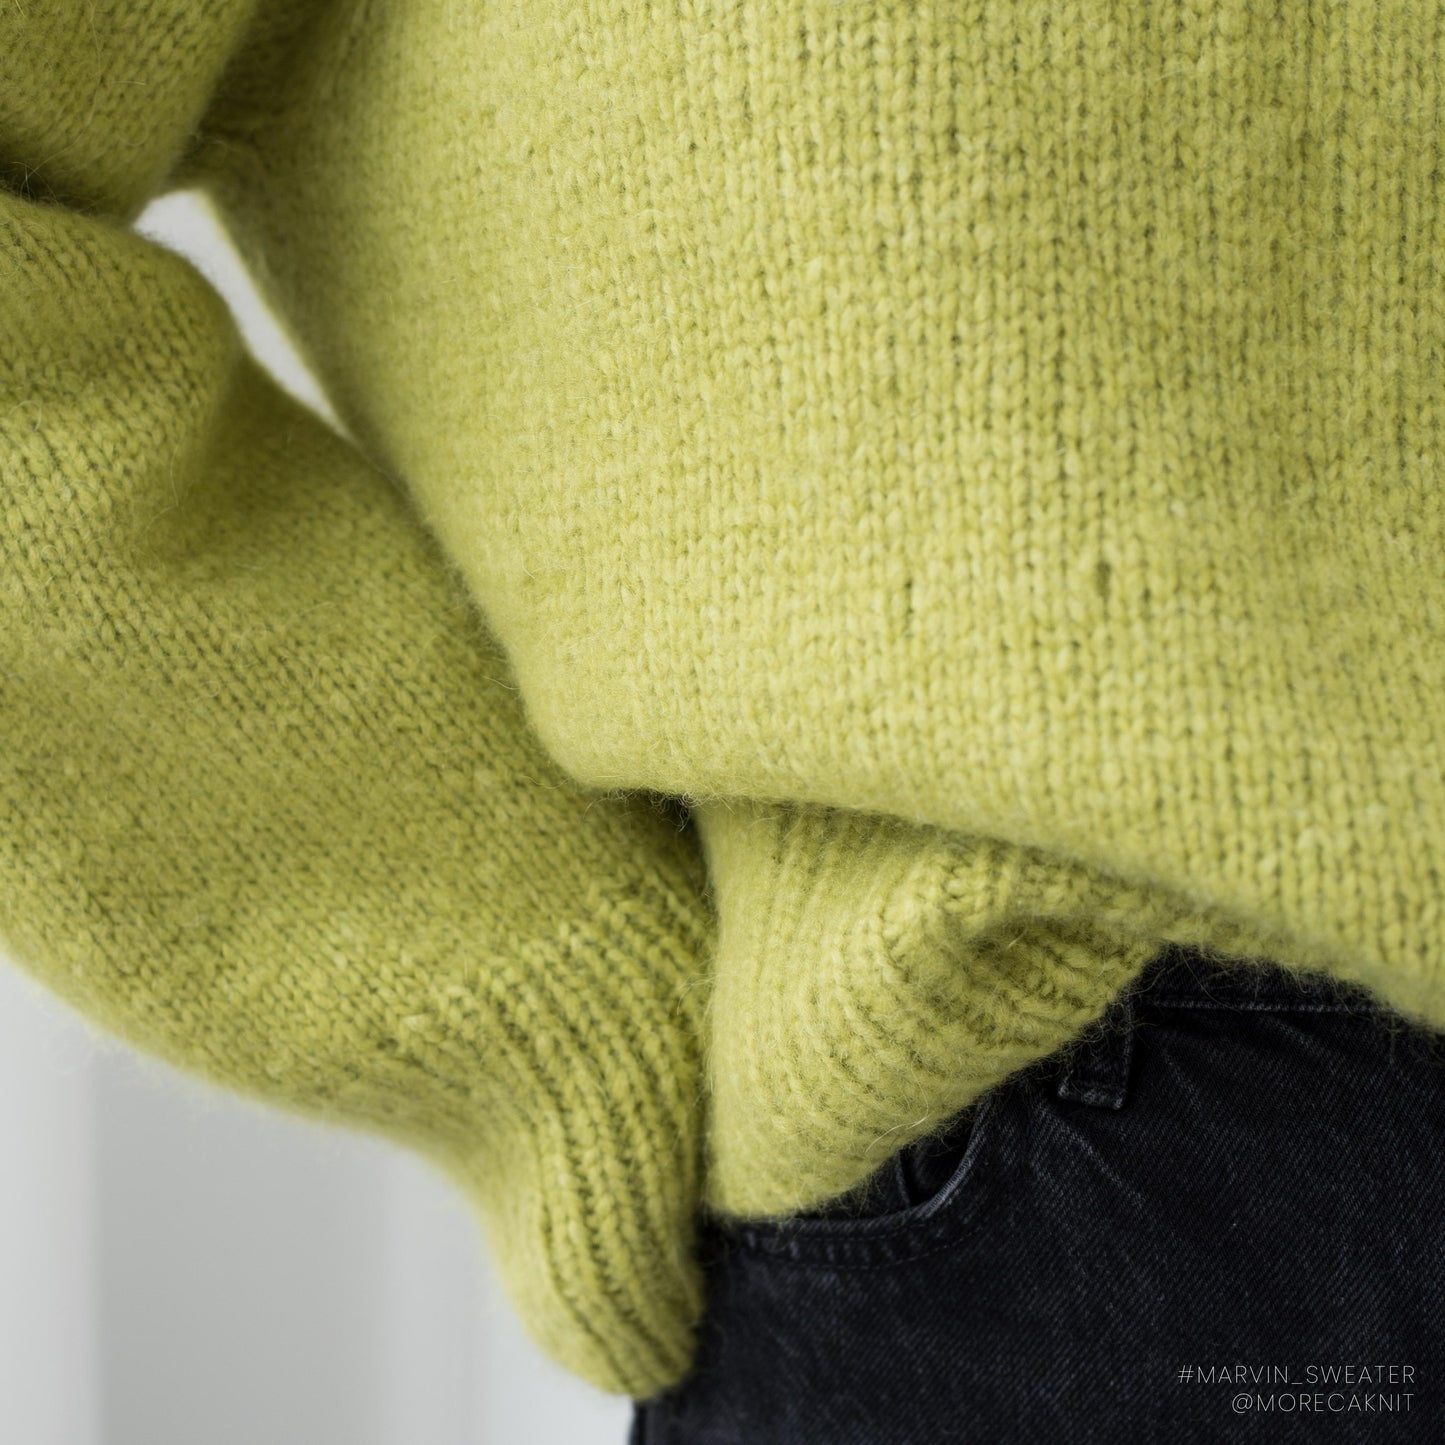 Shop the comfortable and oversized Marvin Sweater knitting pattern by MorecaKnit